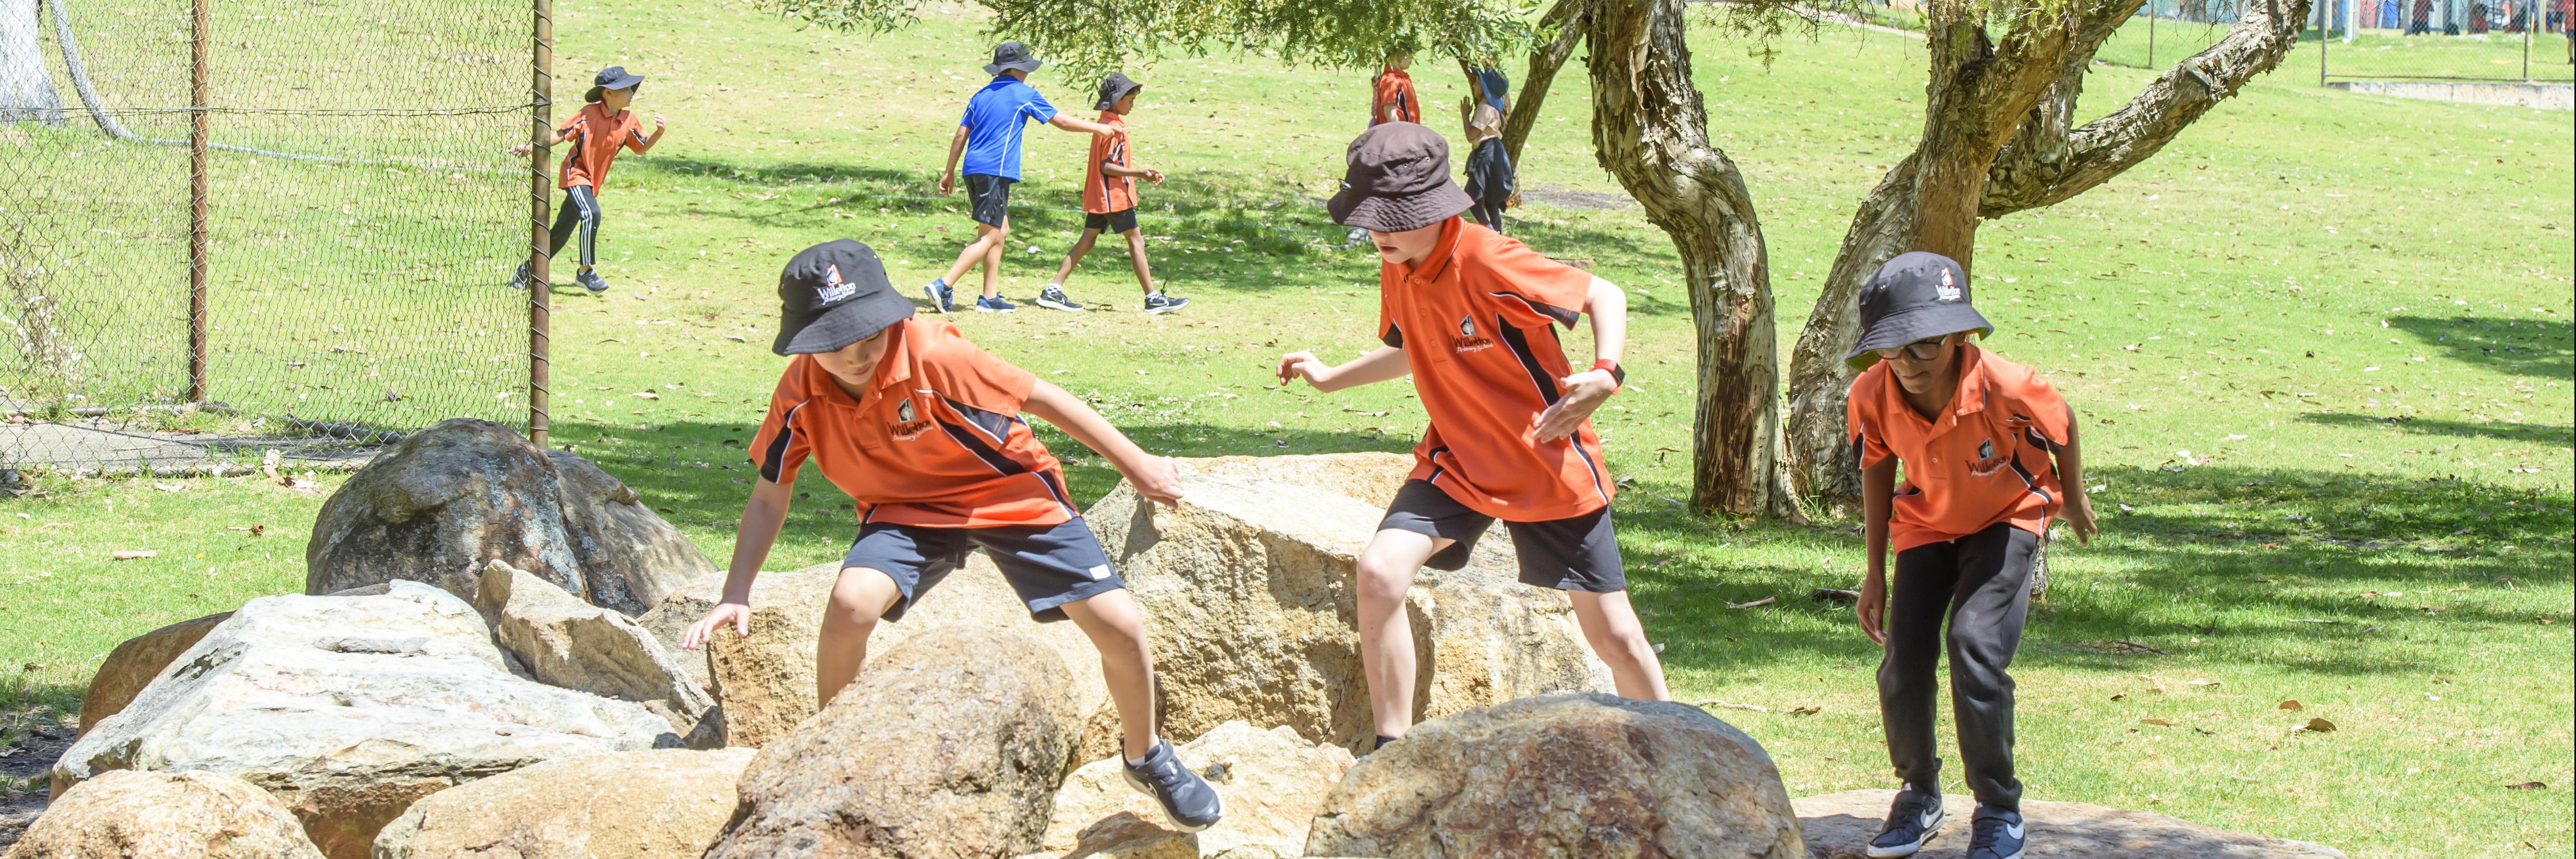 3 boys taking in turns climbing and jumping over large yellow rocks in the playground, all boys looking down towards their feet and holding onto various rocks